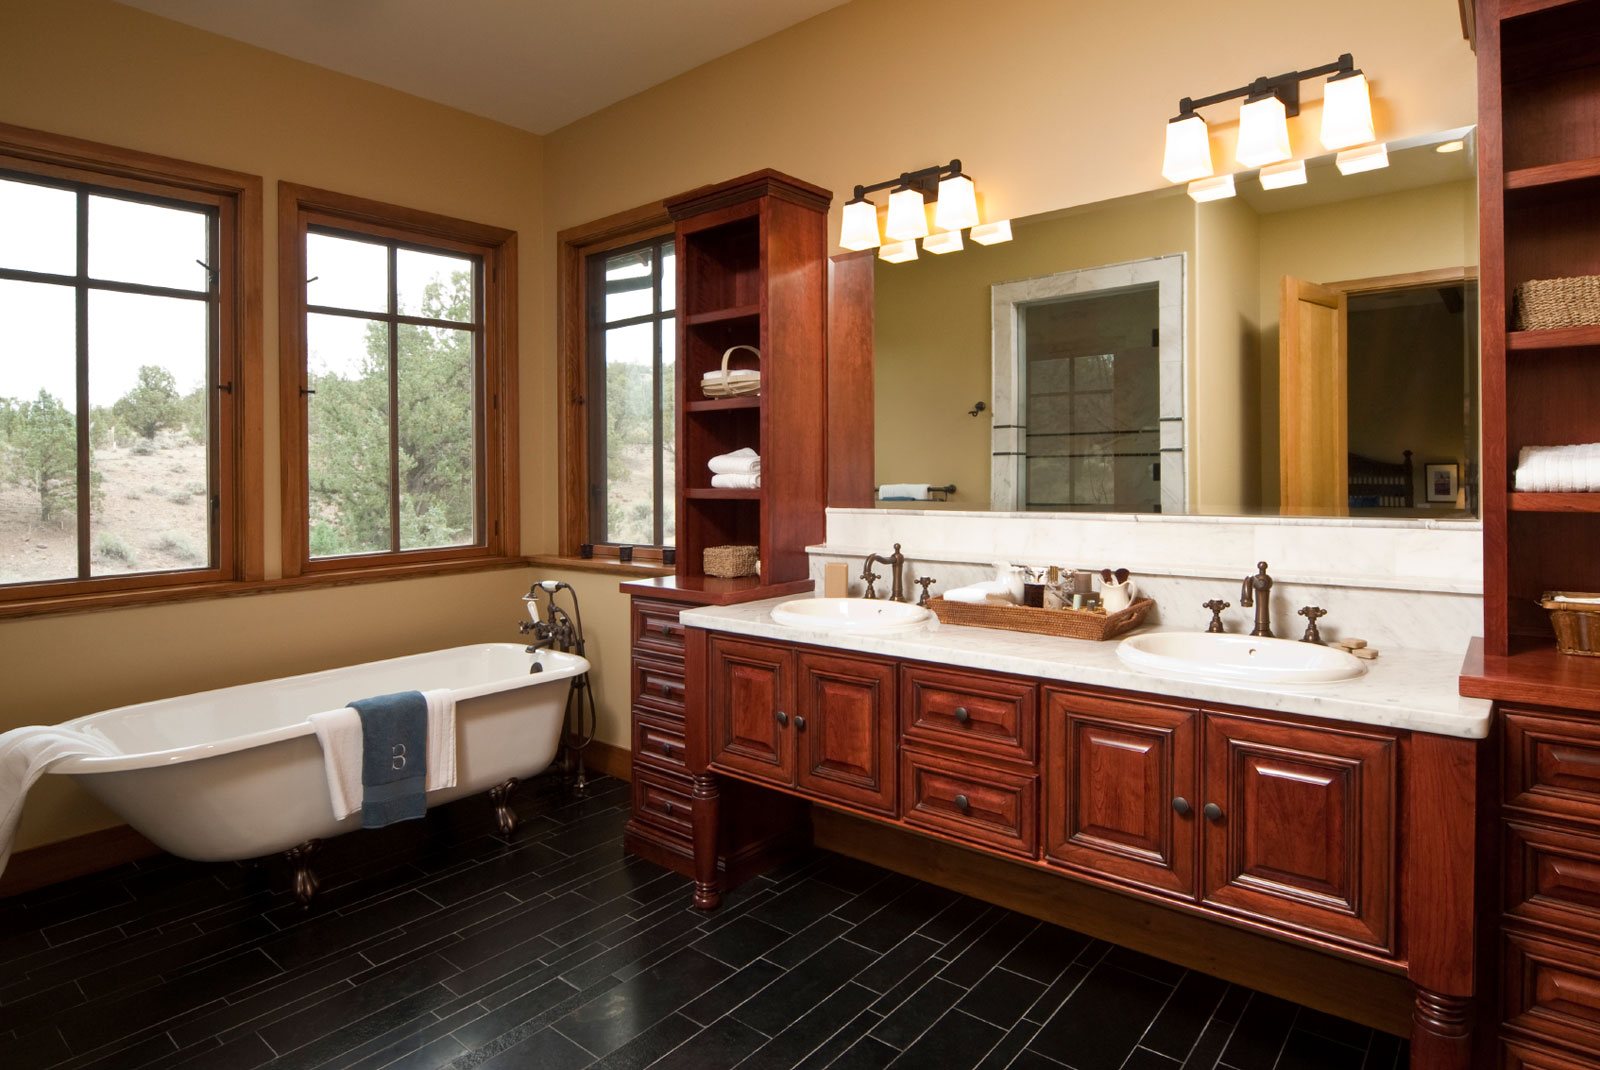 Master Bathroom Black Adorable Master Bathroom Designs Applying Black Flooring Tile With White Free Stand Bathtub Furnished With Dark Brown Vanity Double Sink And Completed With Wall Sconces 15 Master Bathroom Design With Sophisticated Decor Accents